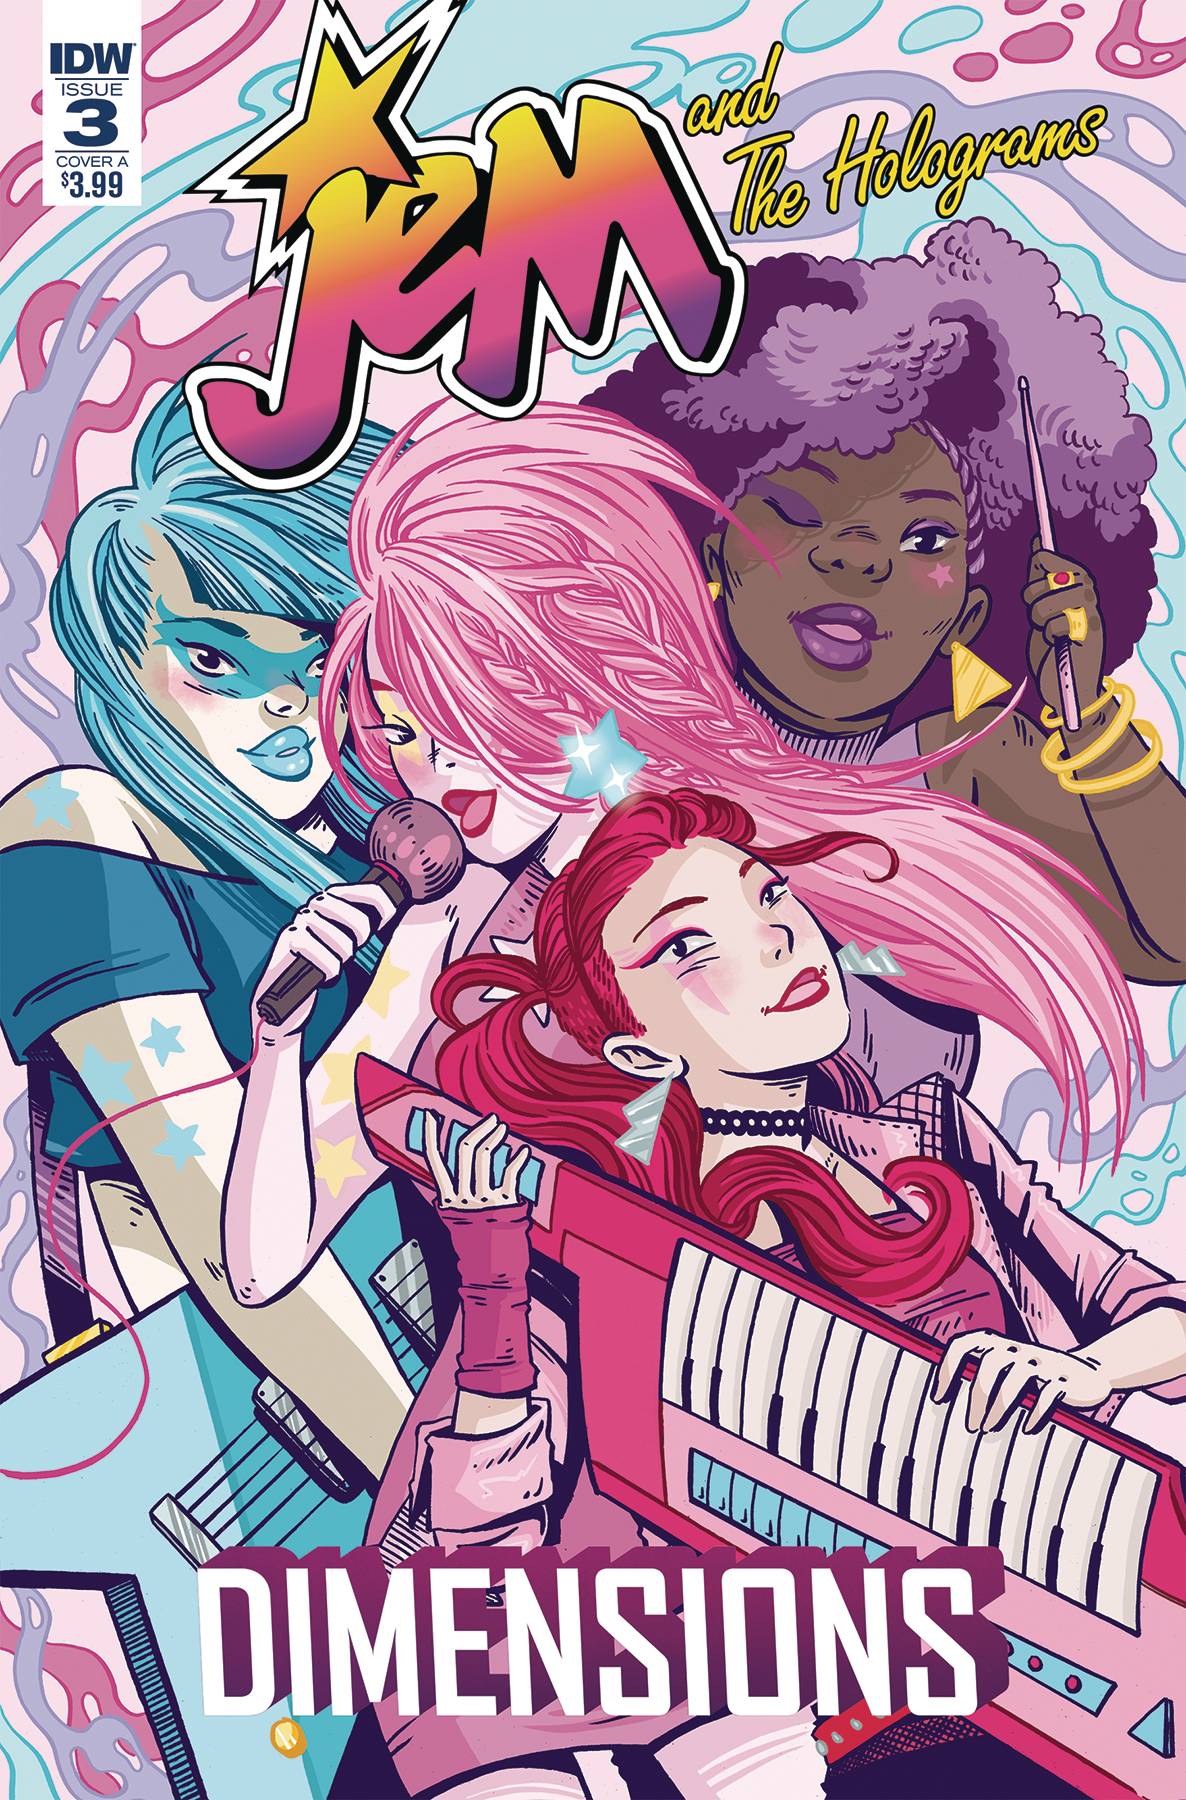 Jem & The Holograms Dimensions #3 Cover A Goux